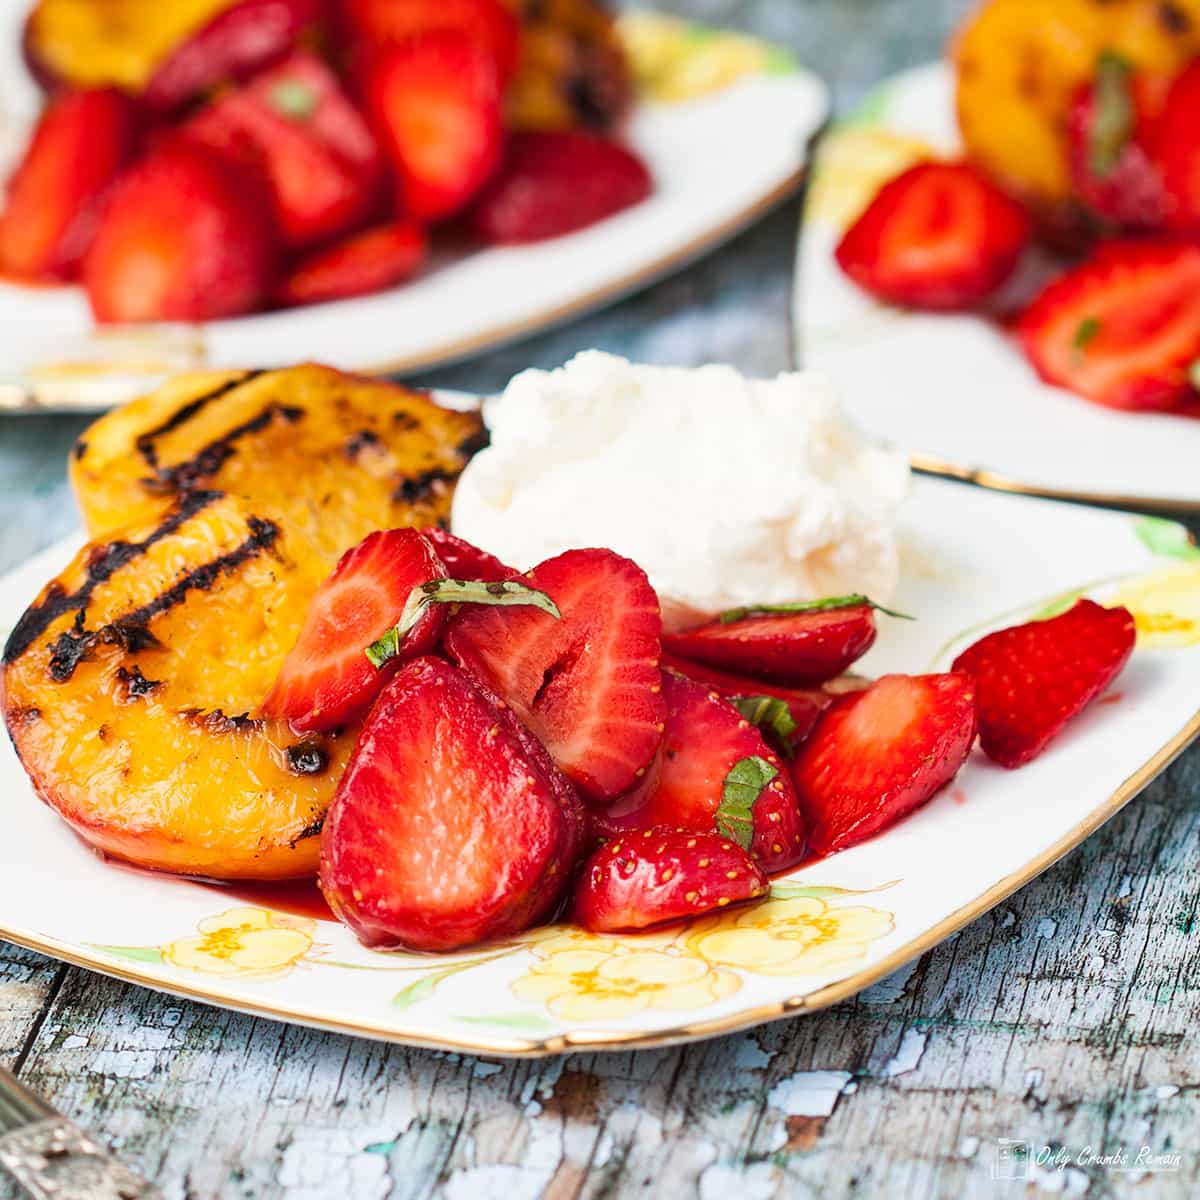 3 plates of griddled peaches with strawberries.